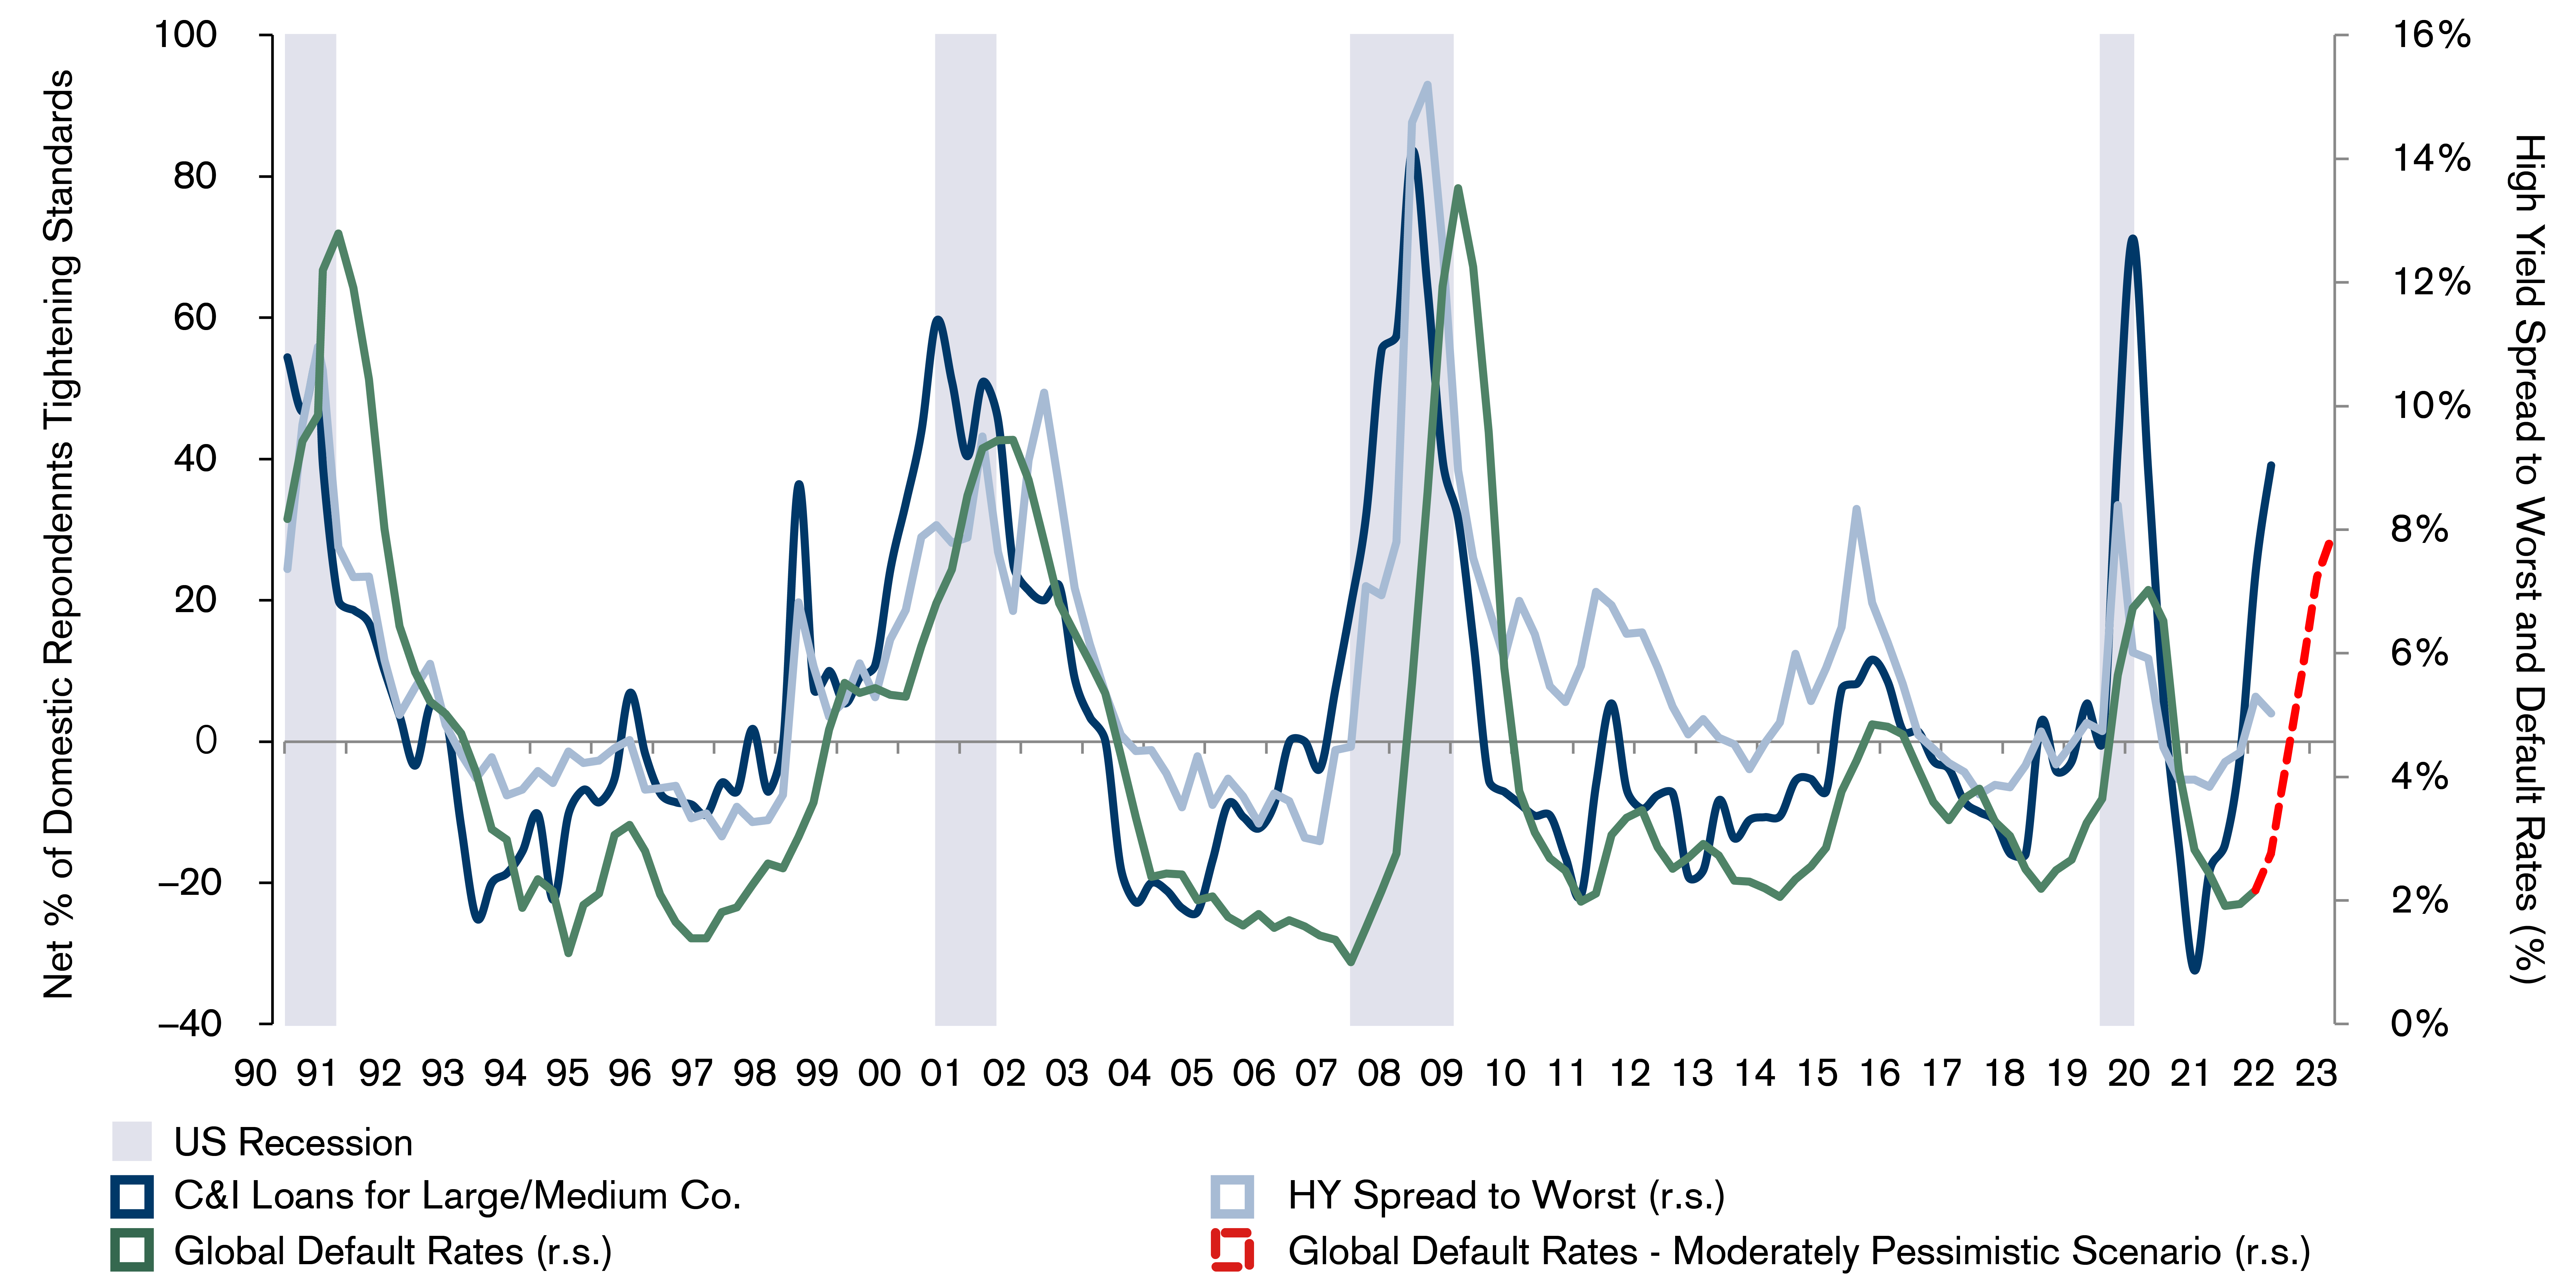 Bank Lending Standards:  tightening of rules during different recession waves in the US